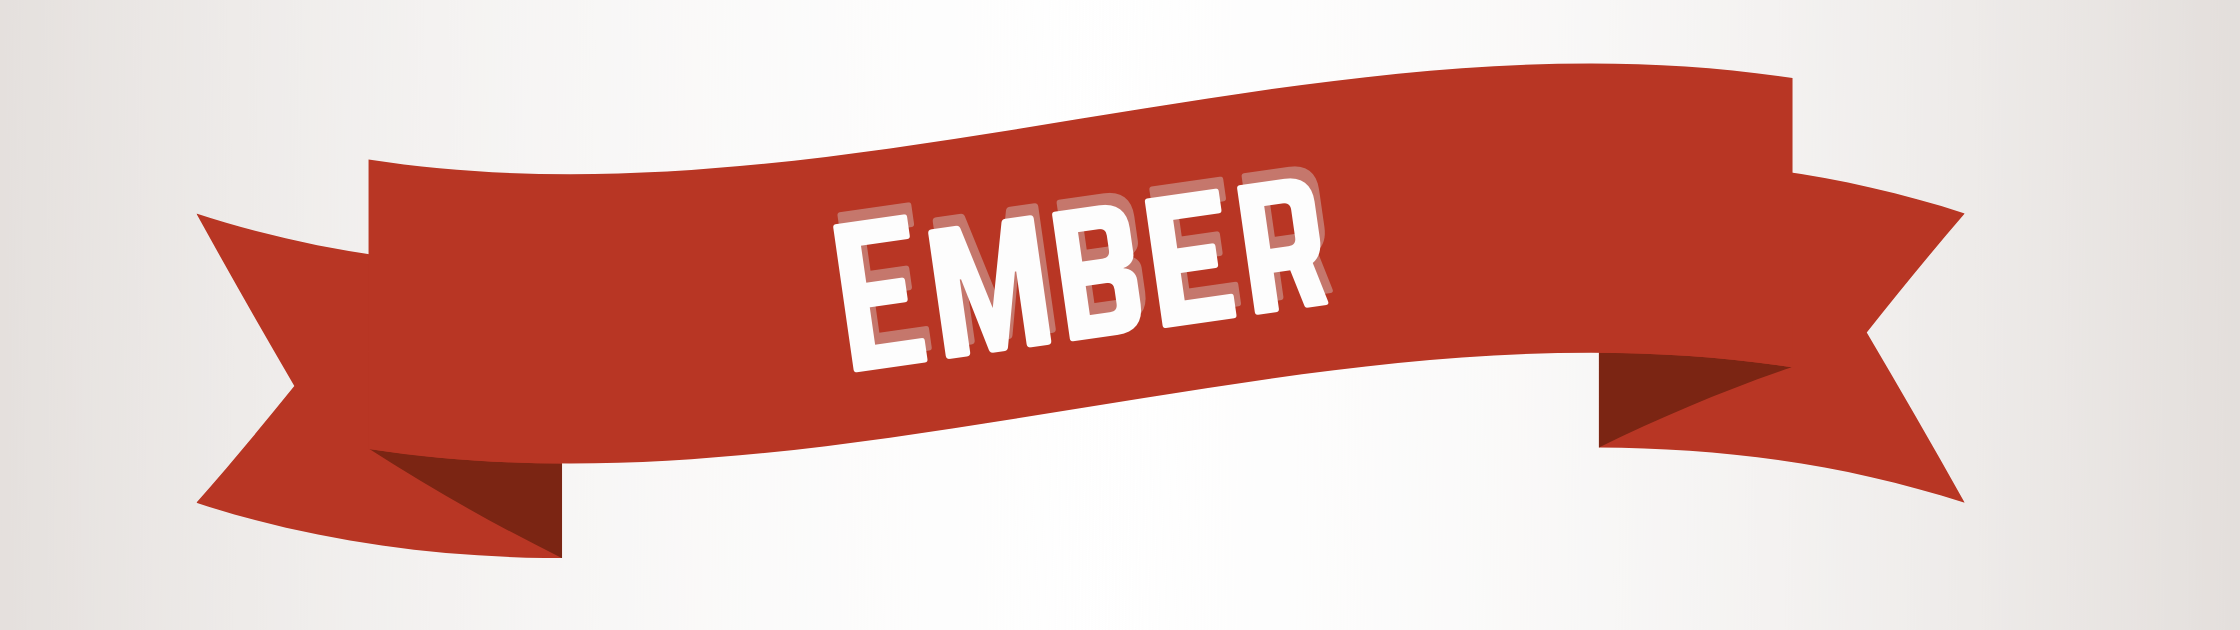 Ember on a red holiday banner